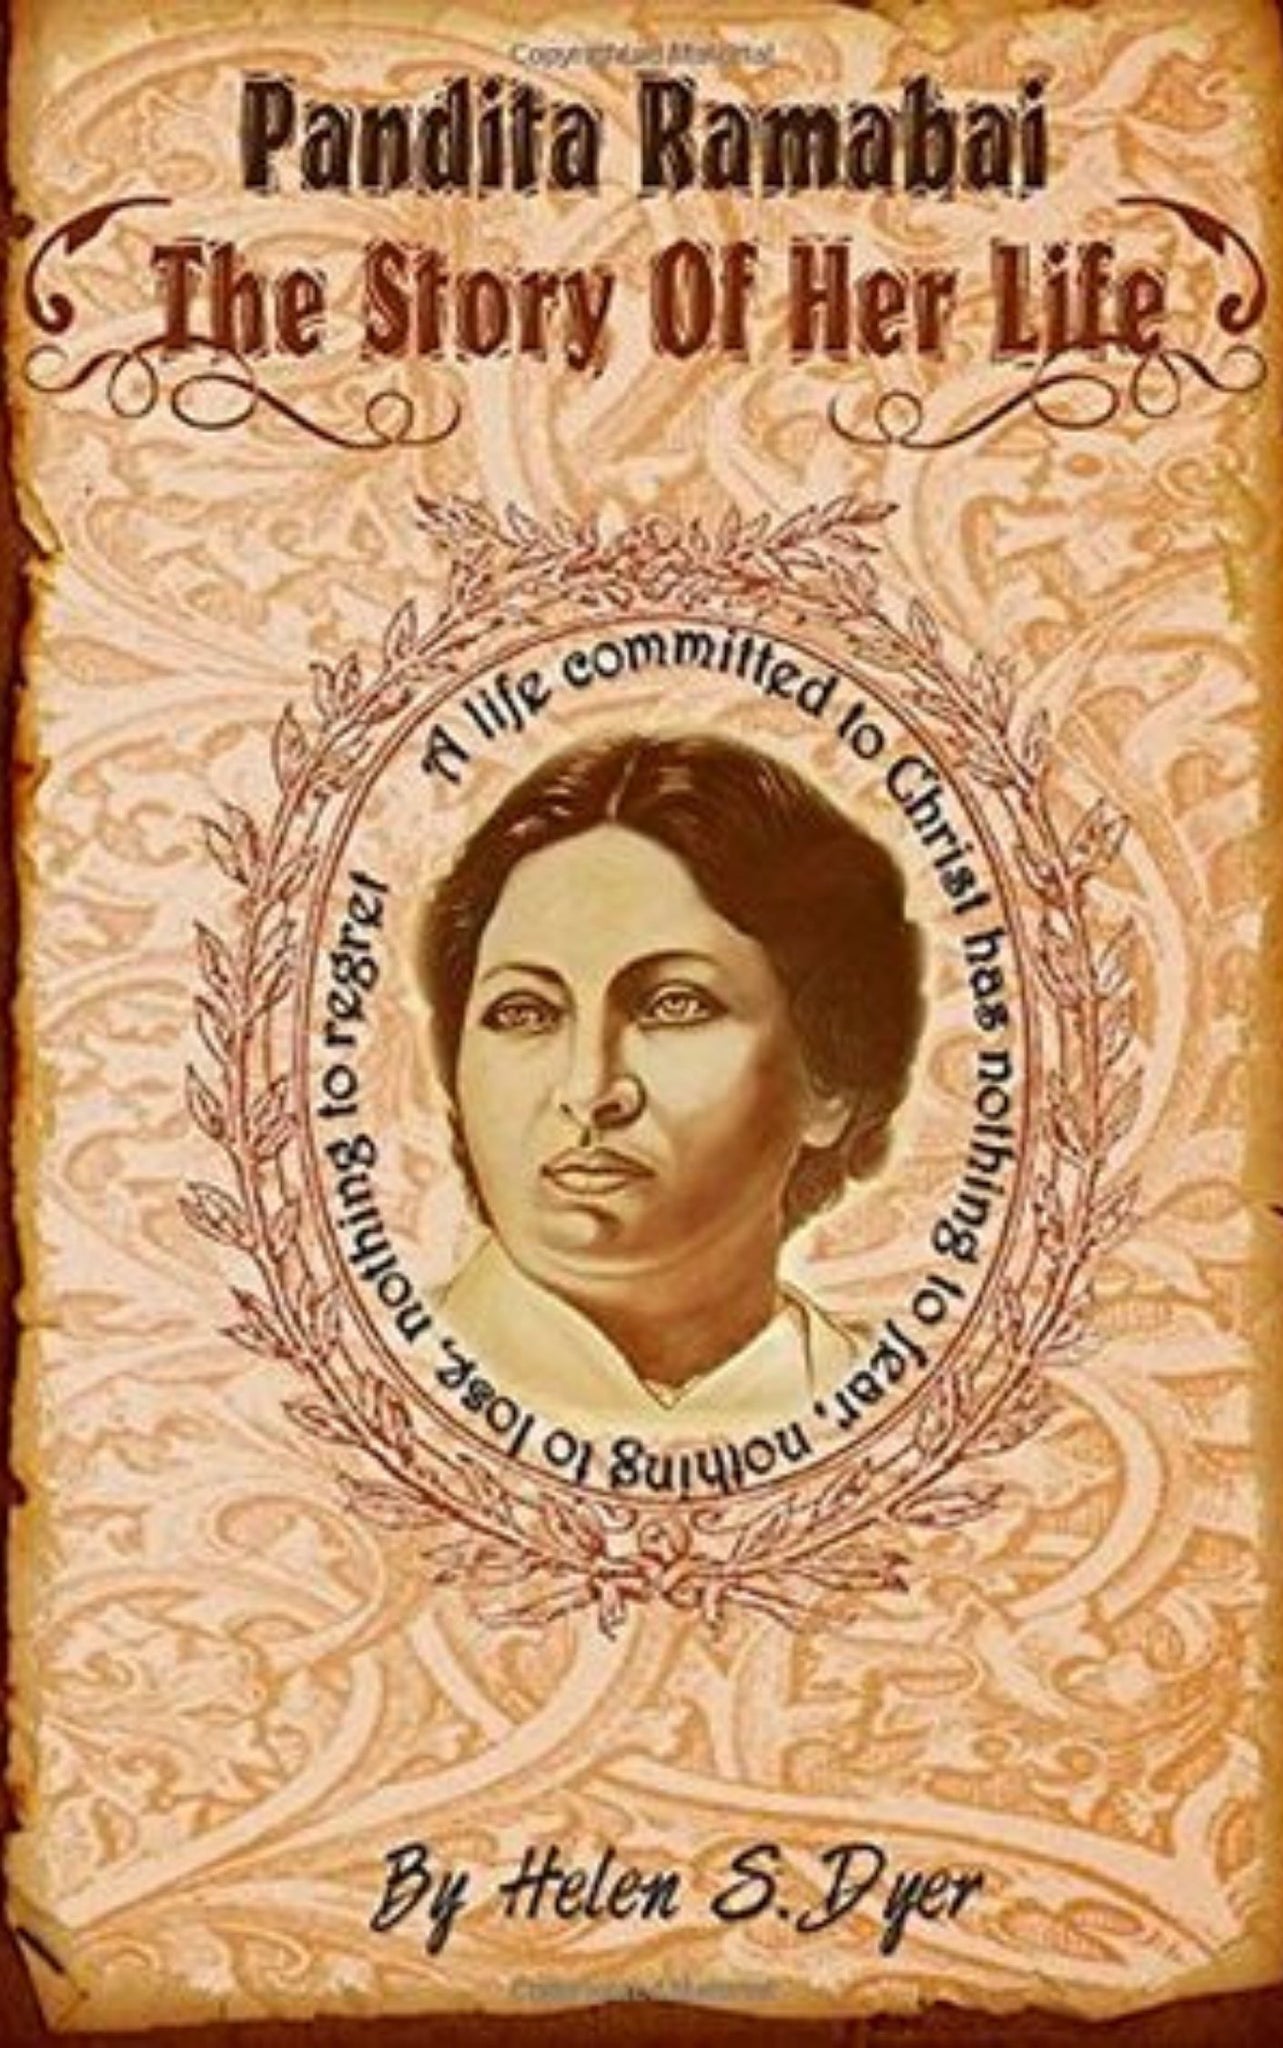 PANDITA RAMABAI THE STORY OF HER LIFE BY HELEN DYER (E-BOOK)